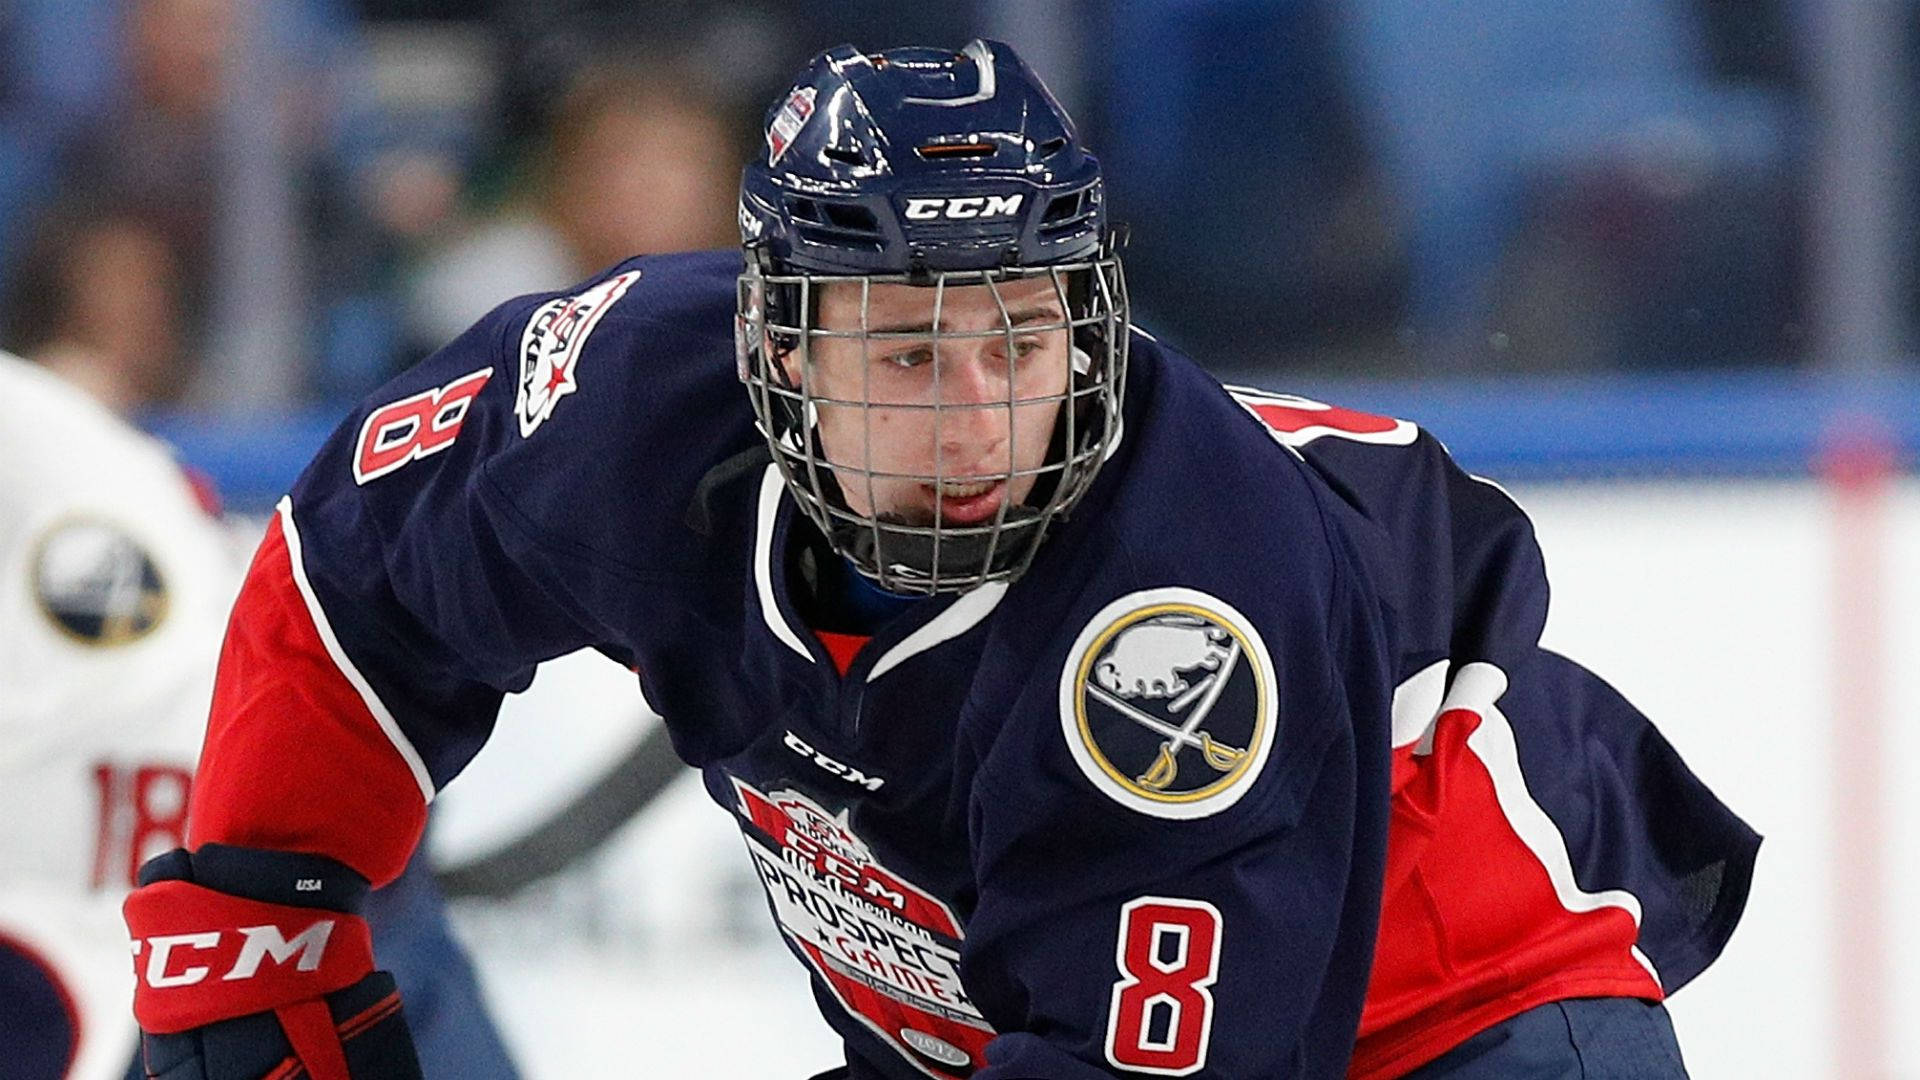 Quinn Hughes Elite Prospects Leaning Forward During Game Background